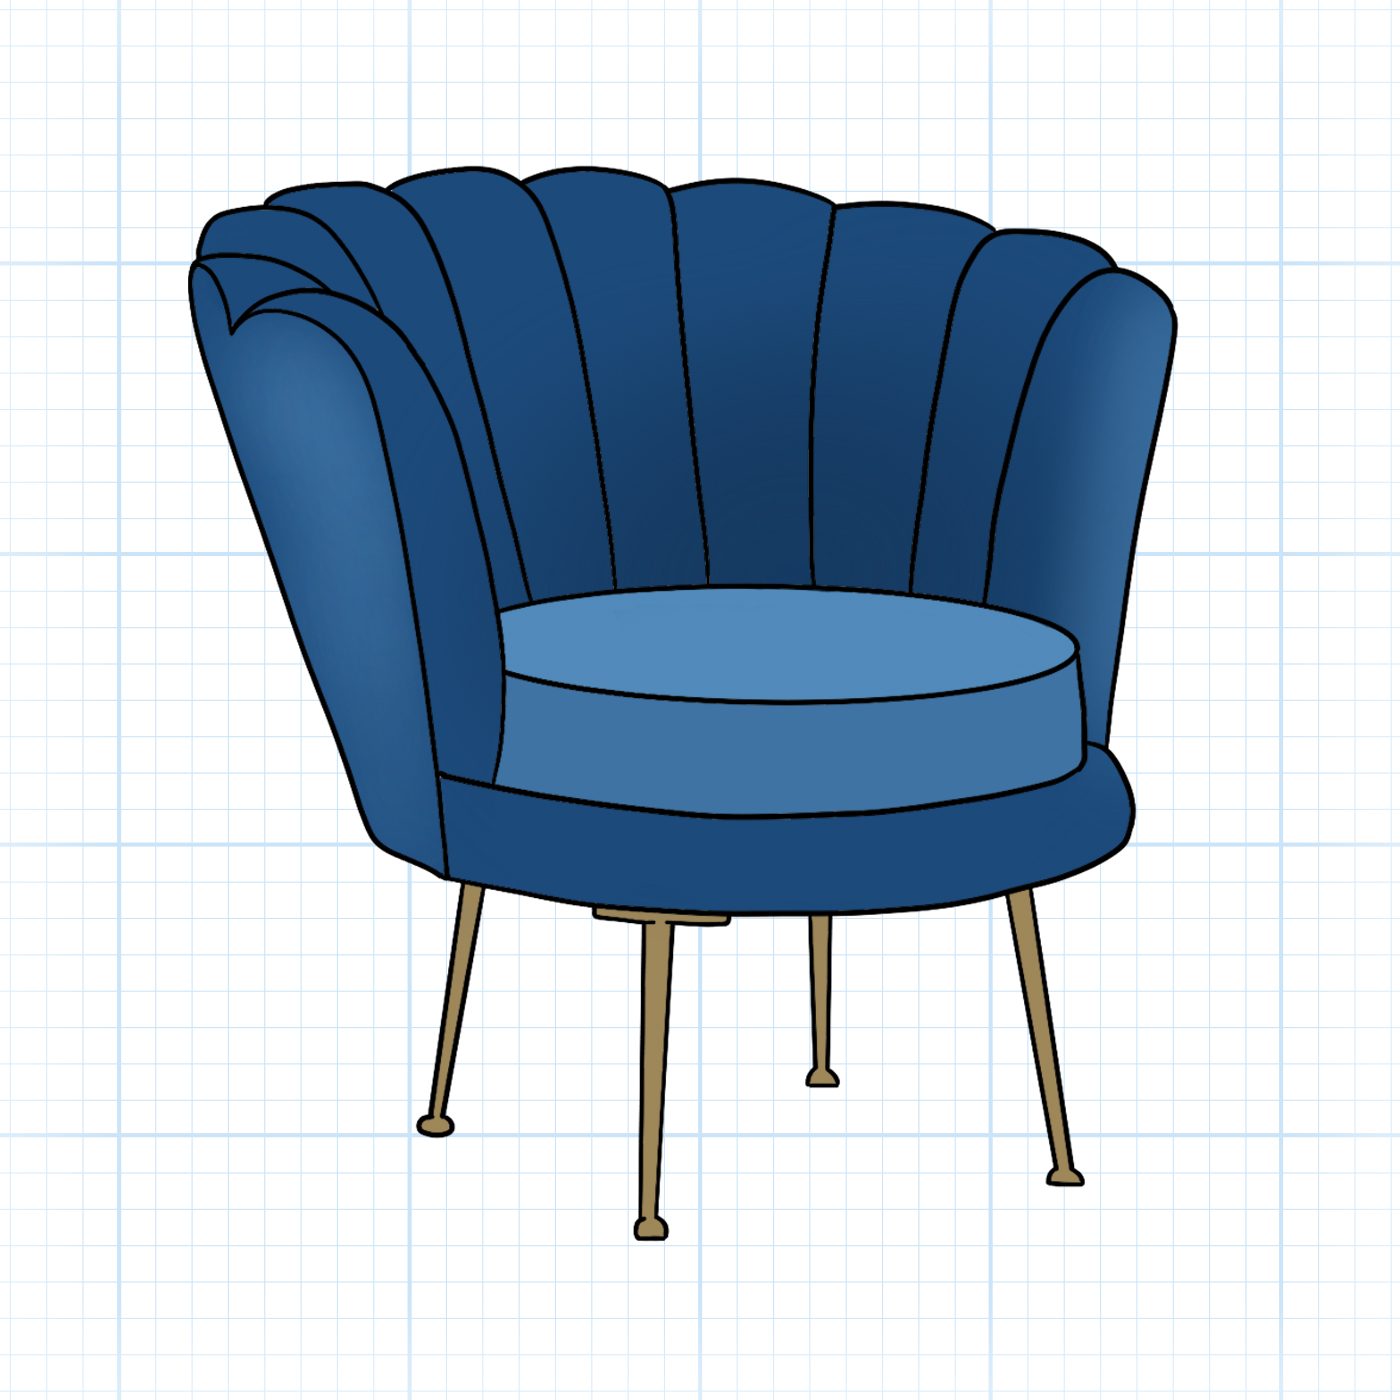 Hollywood Regency Chair Graphic